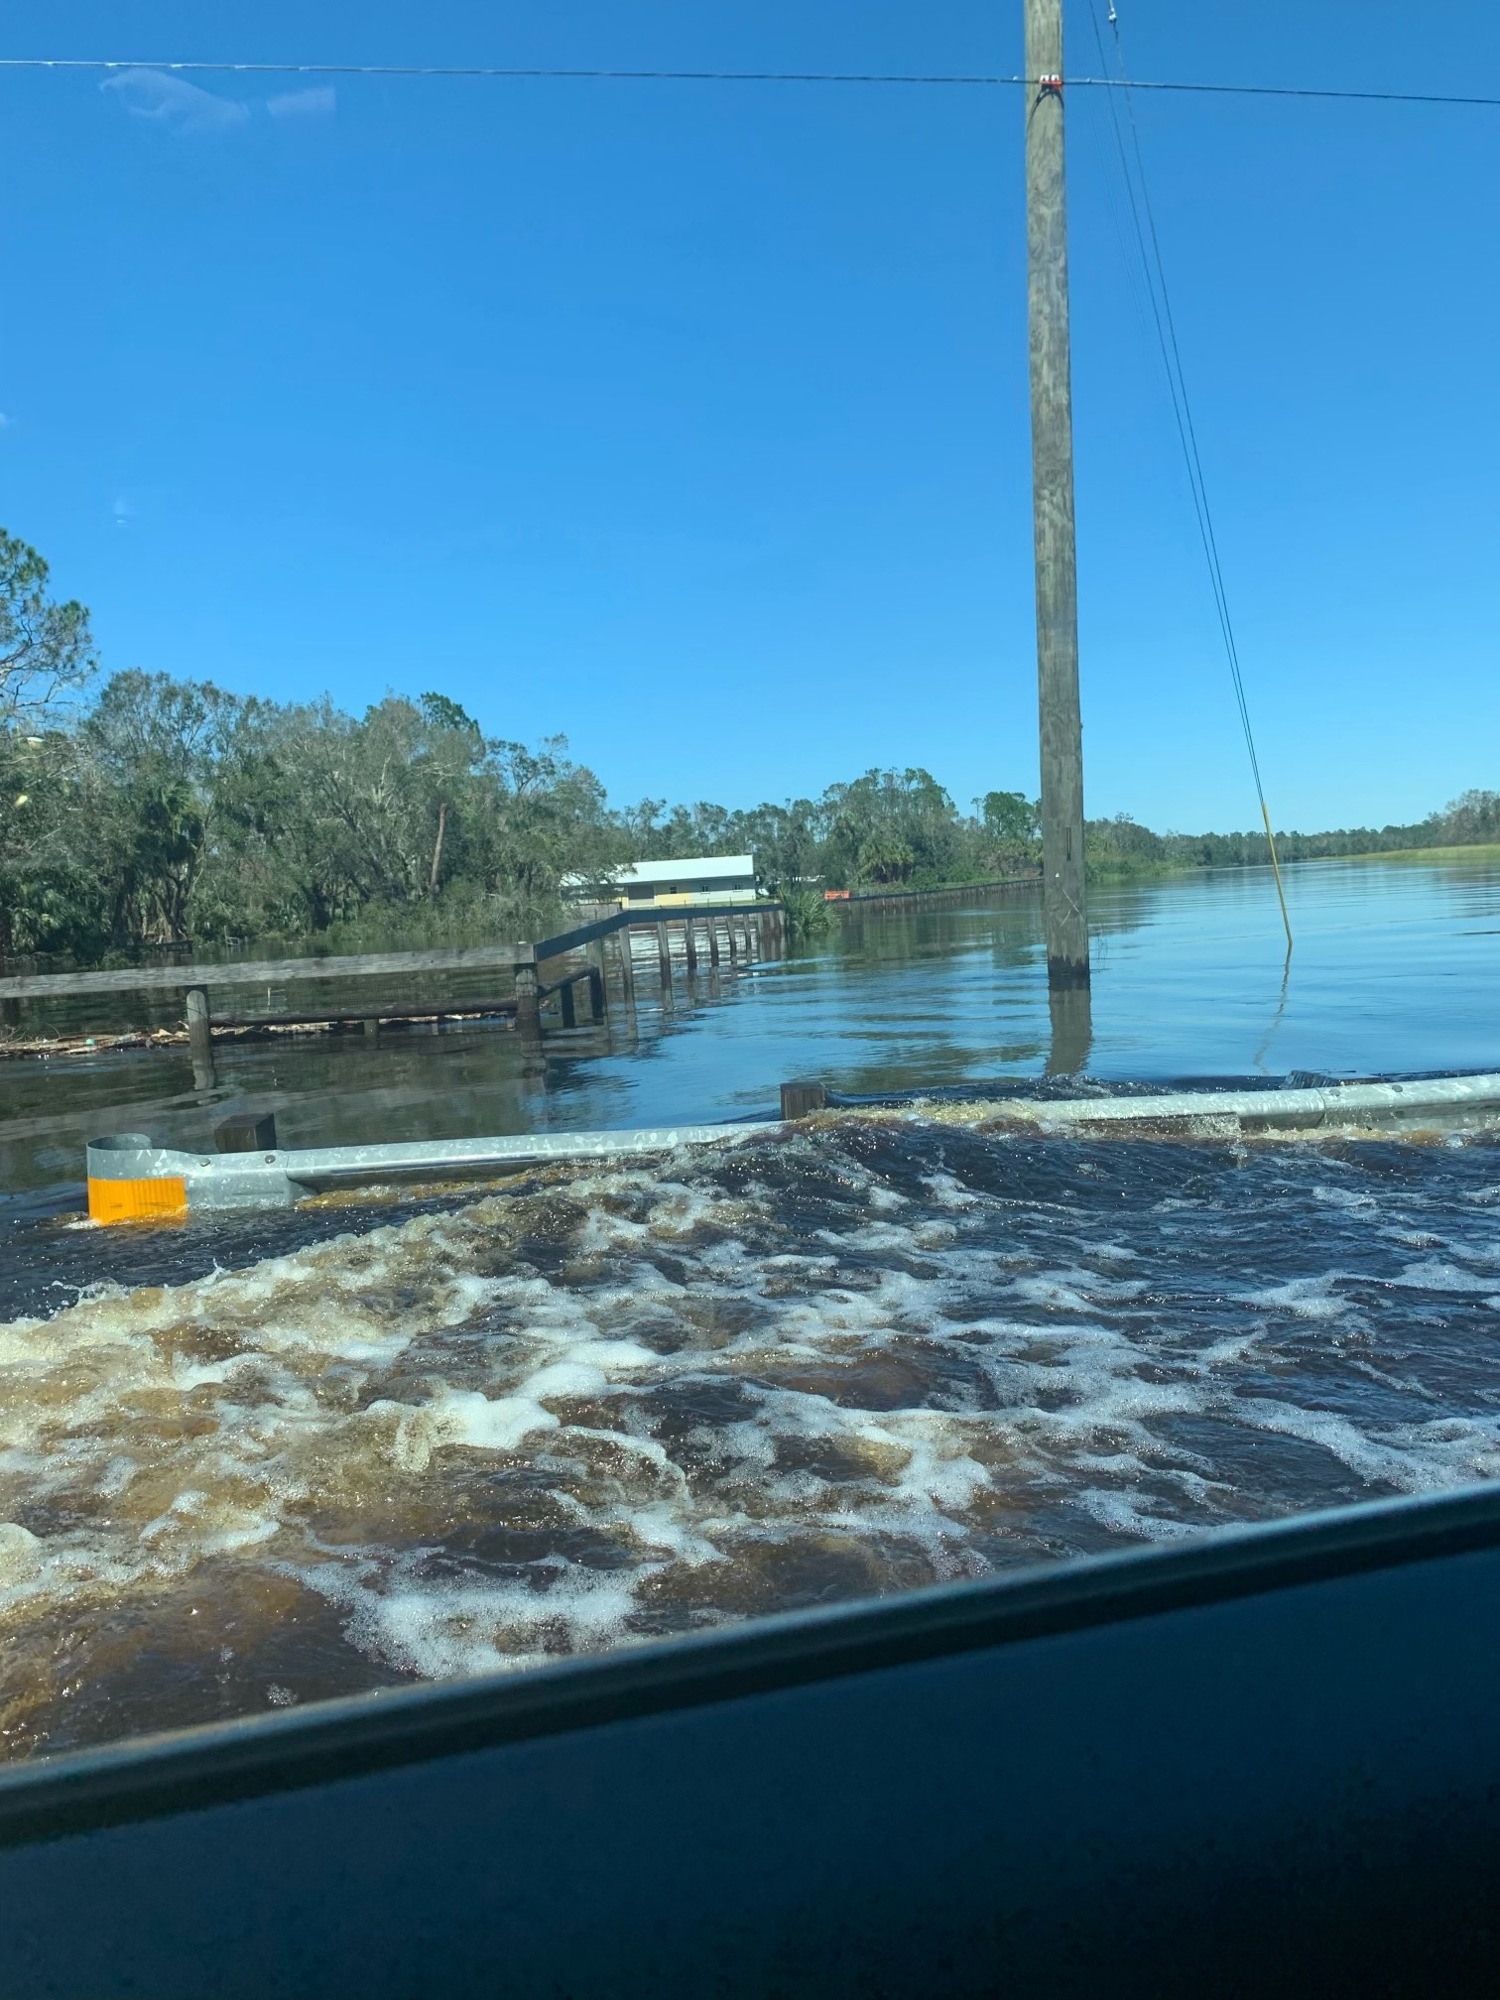 A photo taken during Sean Williams' drive back from Fort Lauderdale to St. Petersburg in the immediate aftermath of Hurricane Ian. (Photo courtesy of Sean Williams)